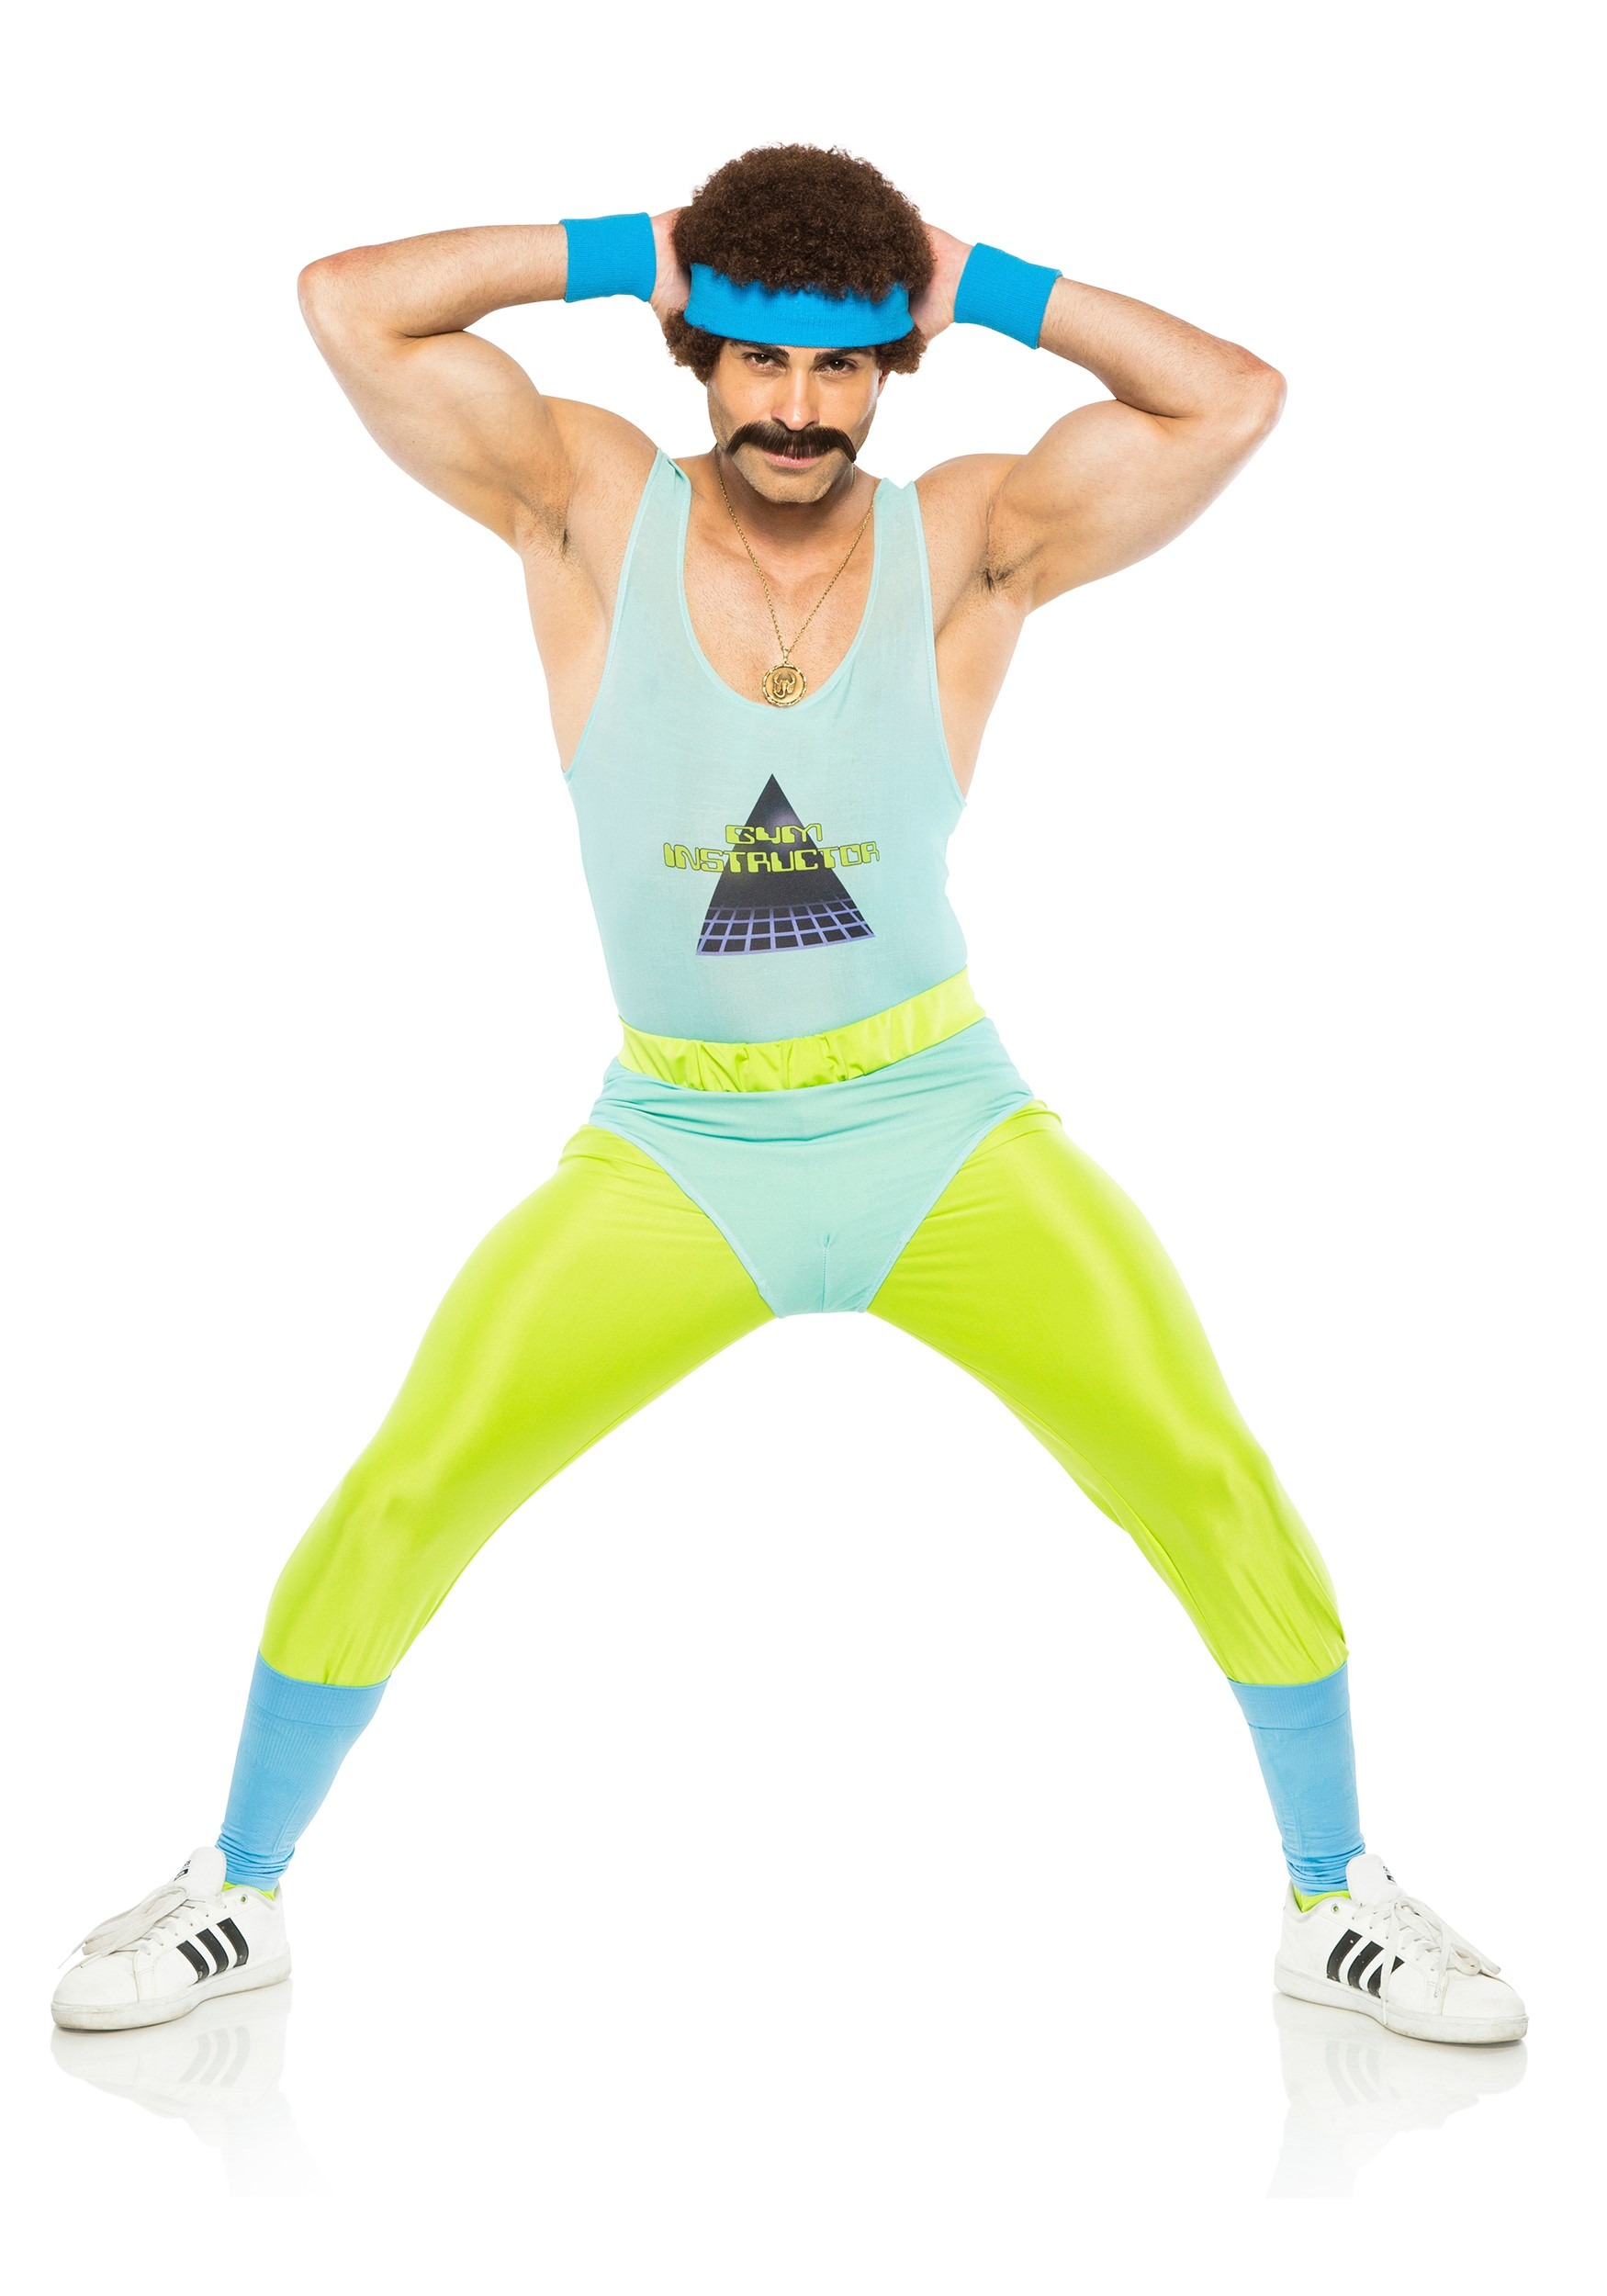 80's Gym Instructor Costume For Men , 80s Workout Costume